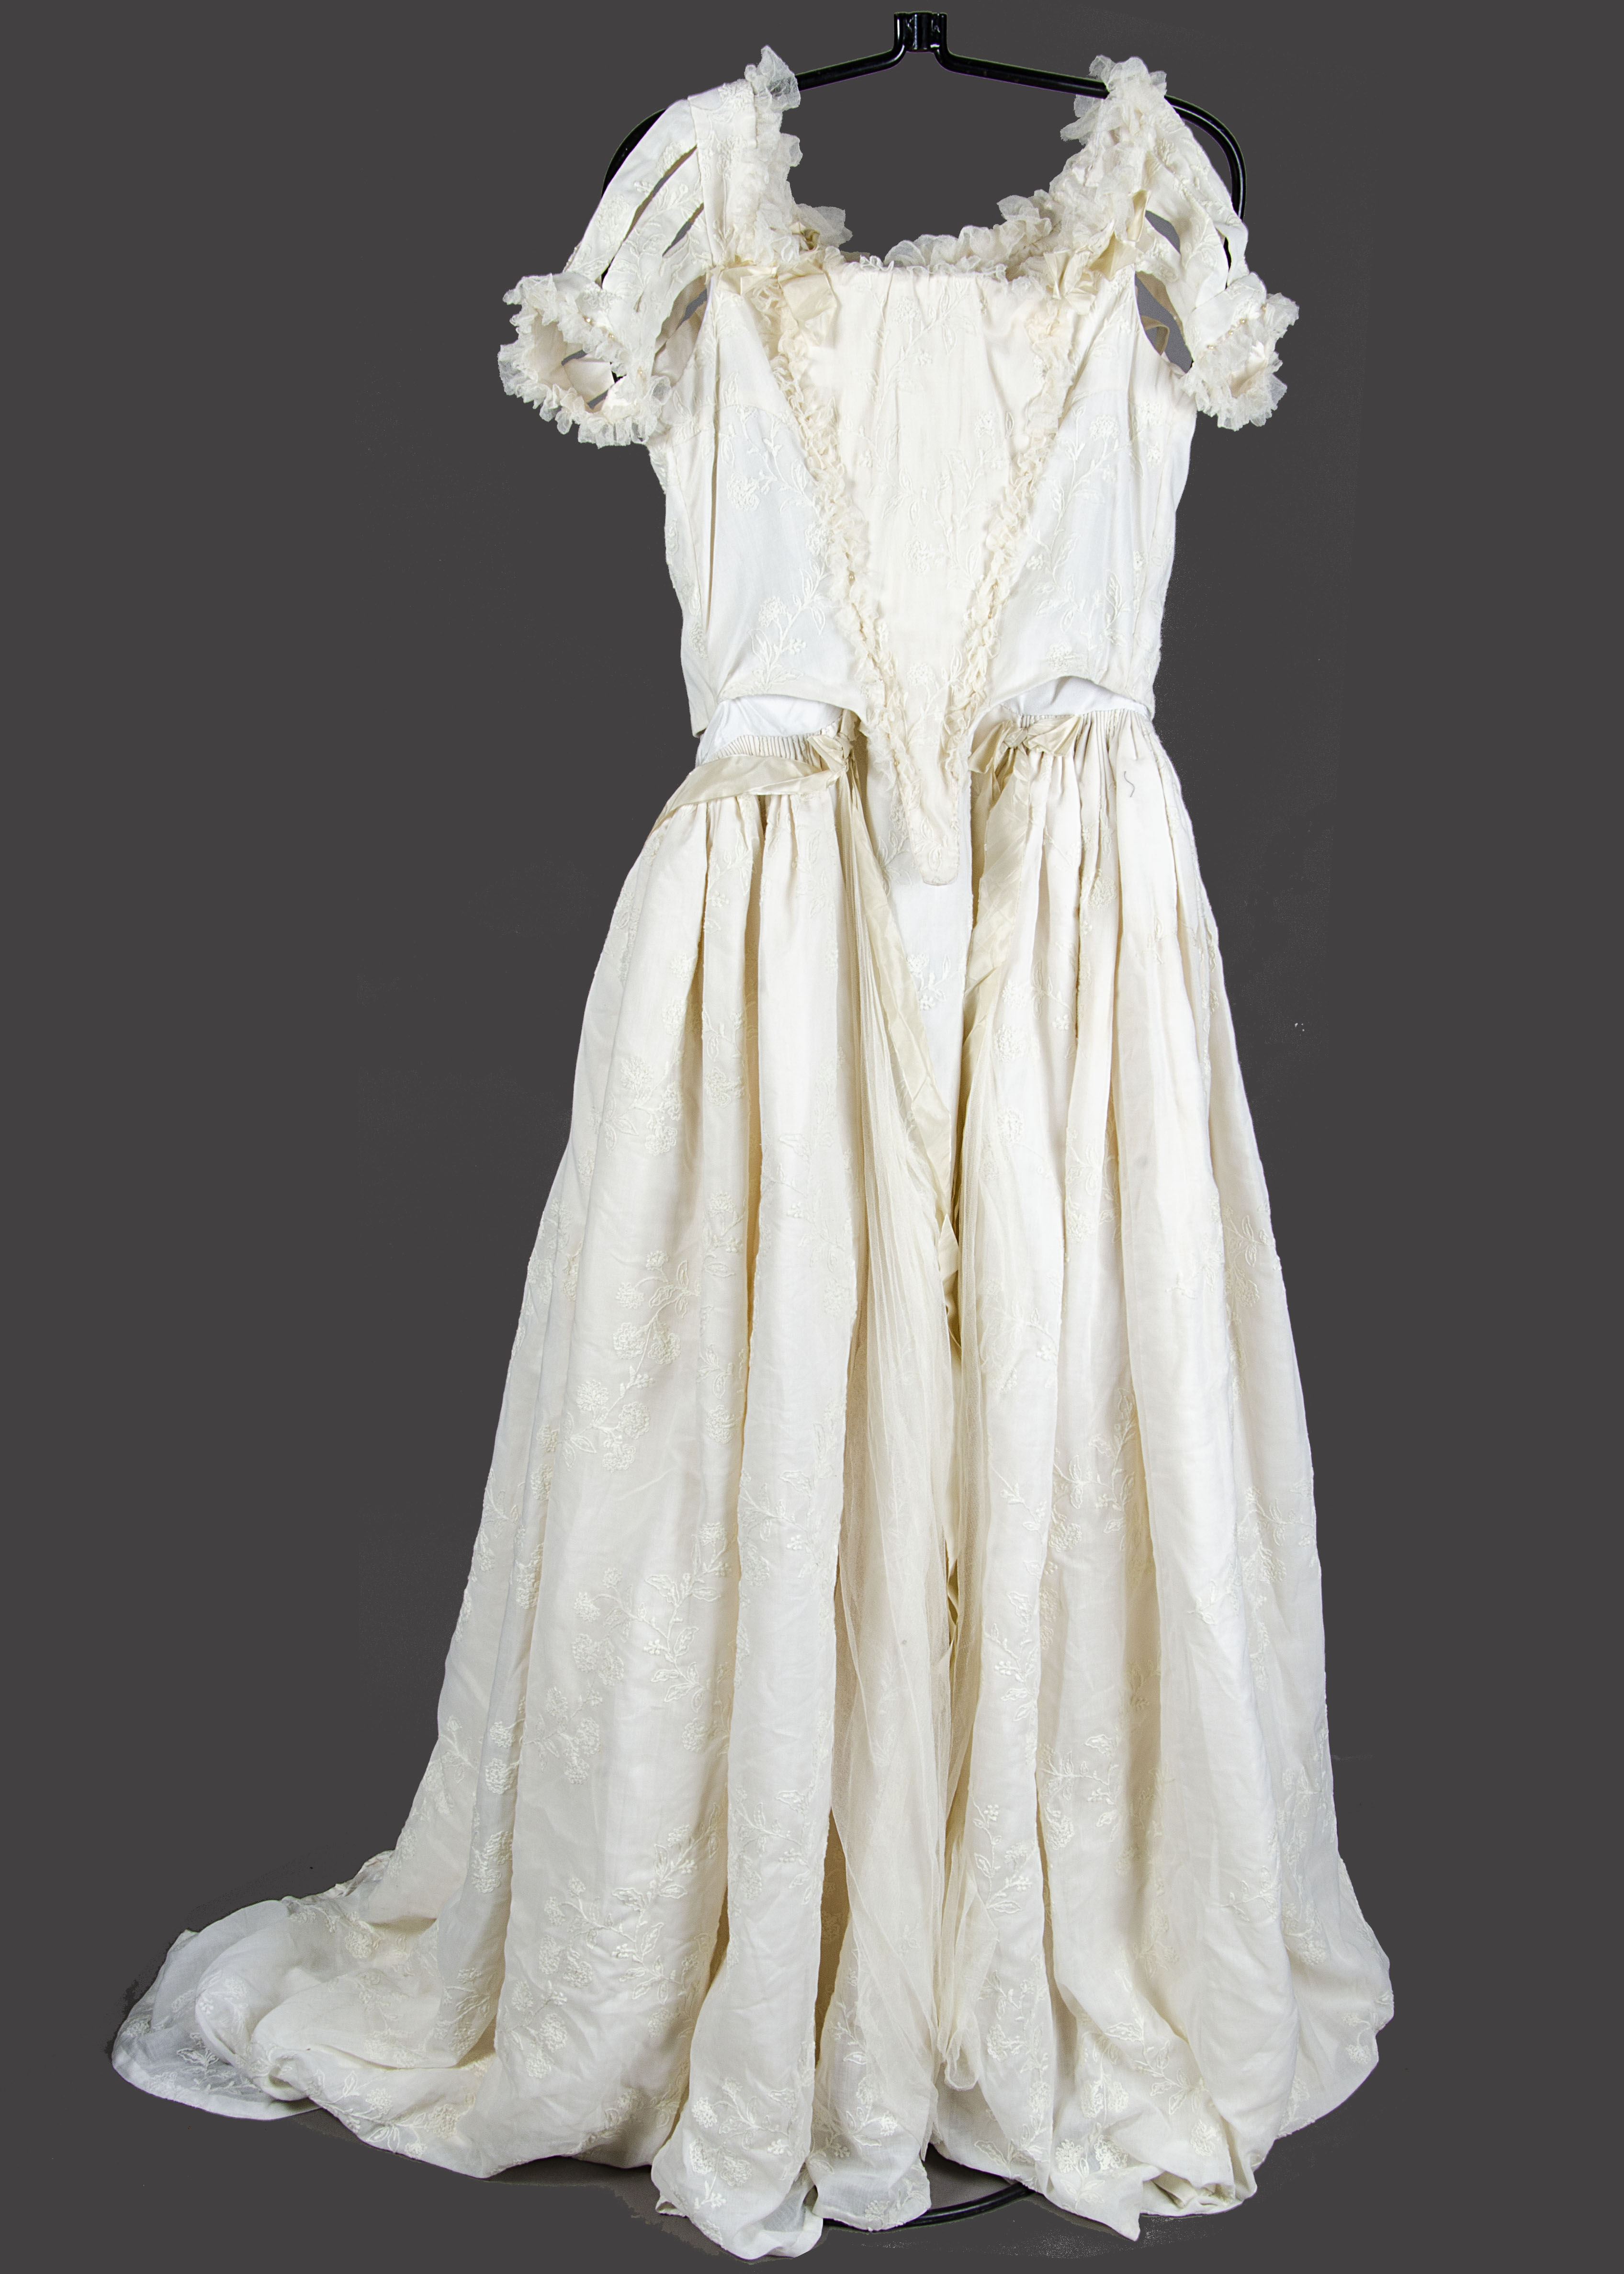 A collection of modern theatre costumes mainly in the Shakespearian style, by Academy Costumes